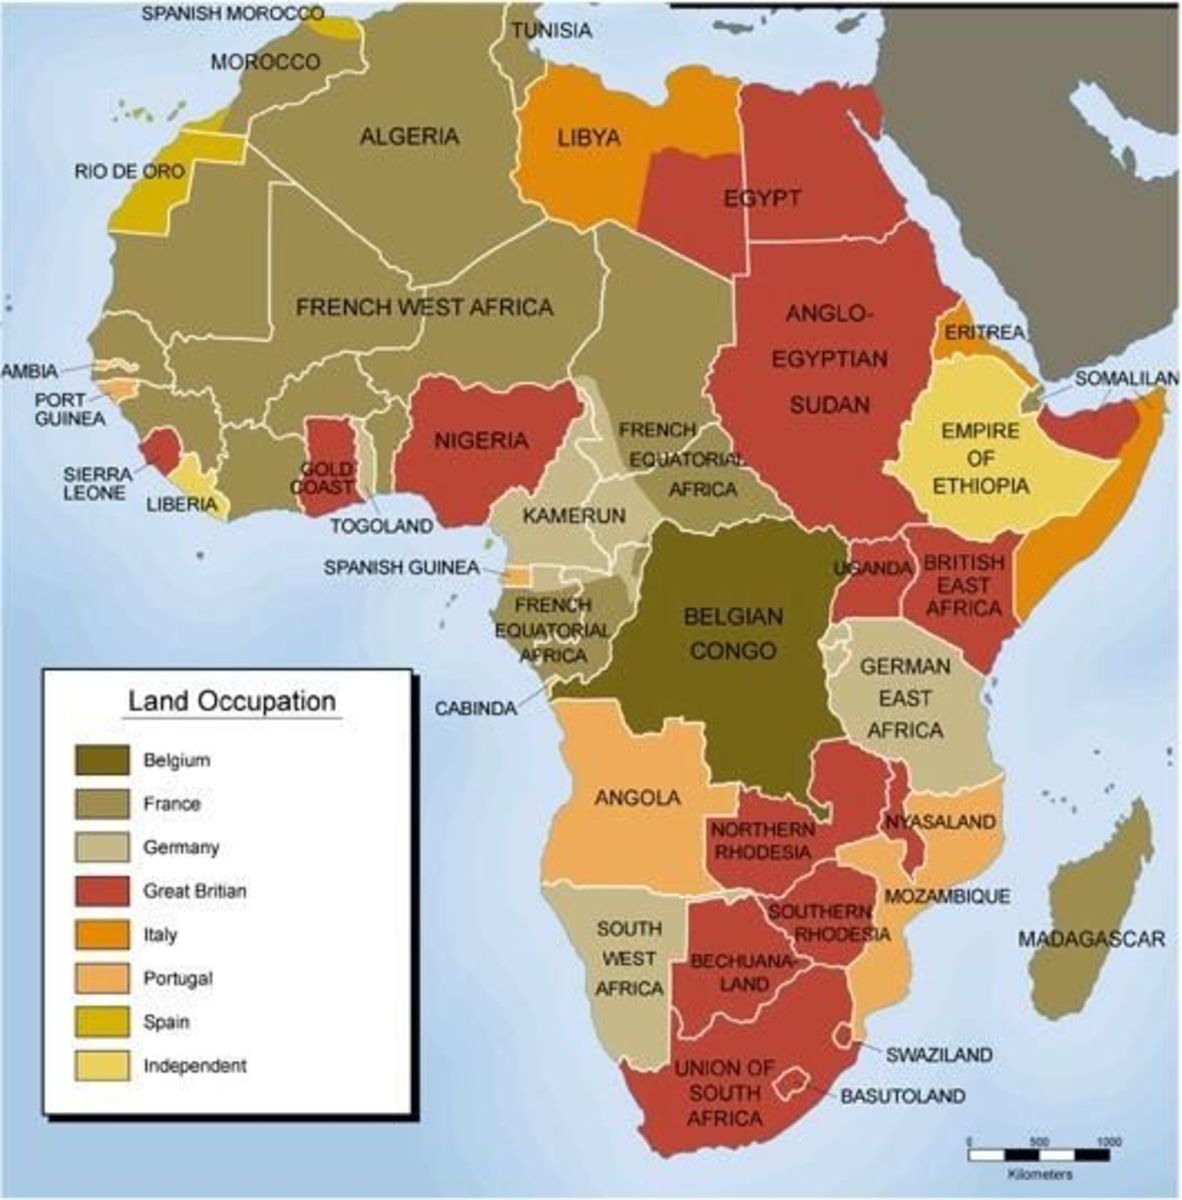 Examining The Debt of the African Continent and Role of Colonialism